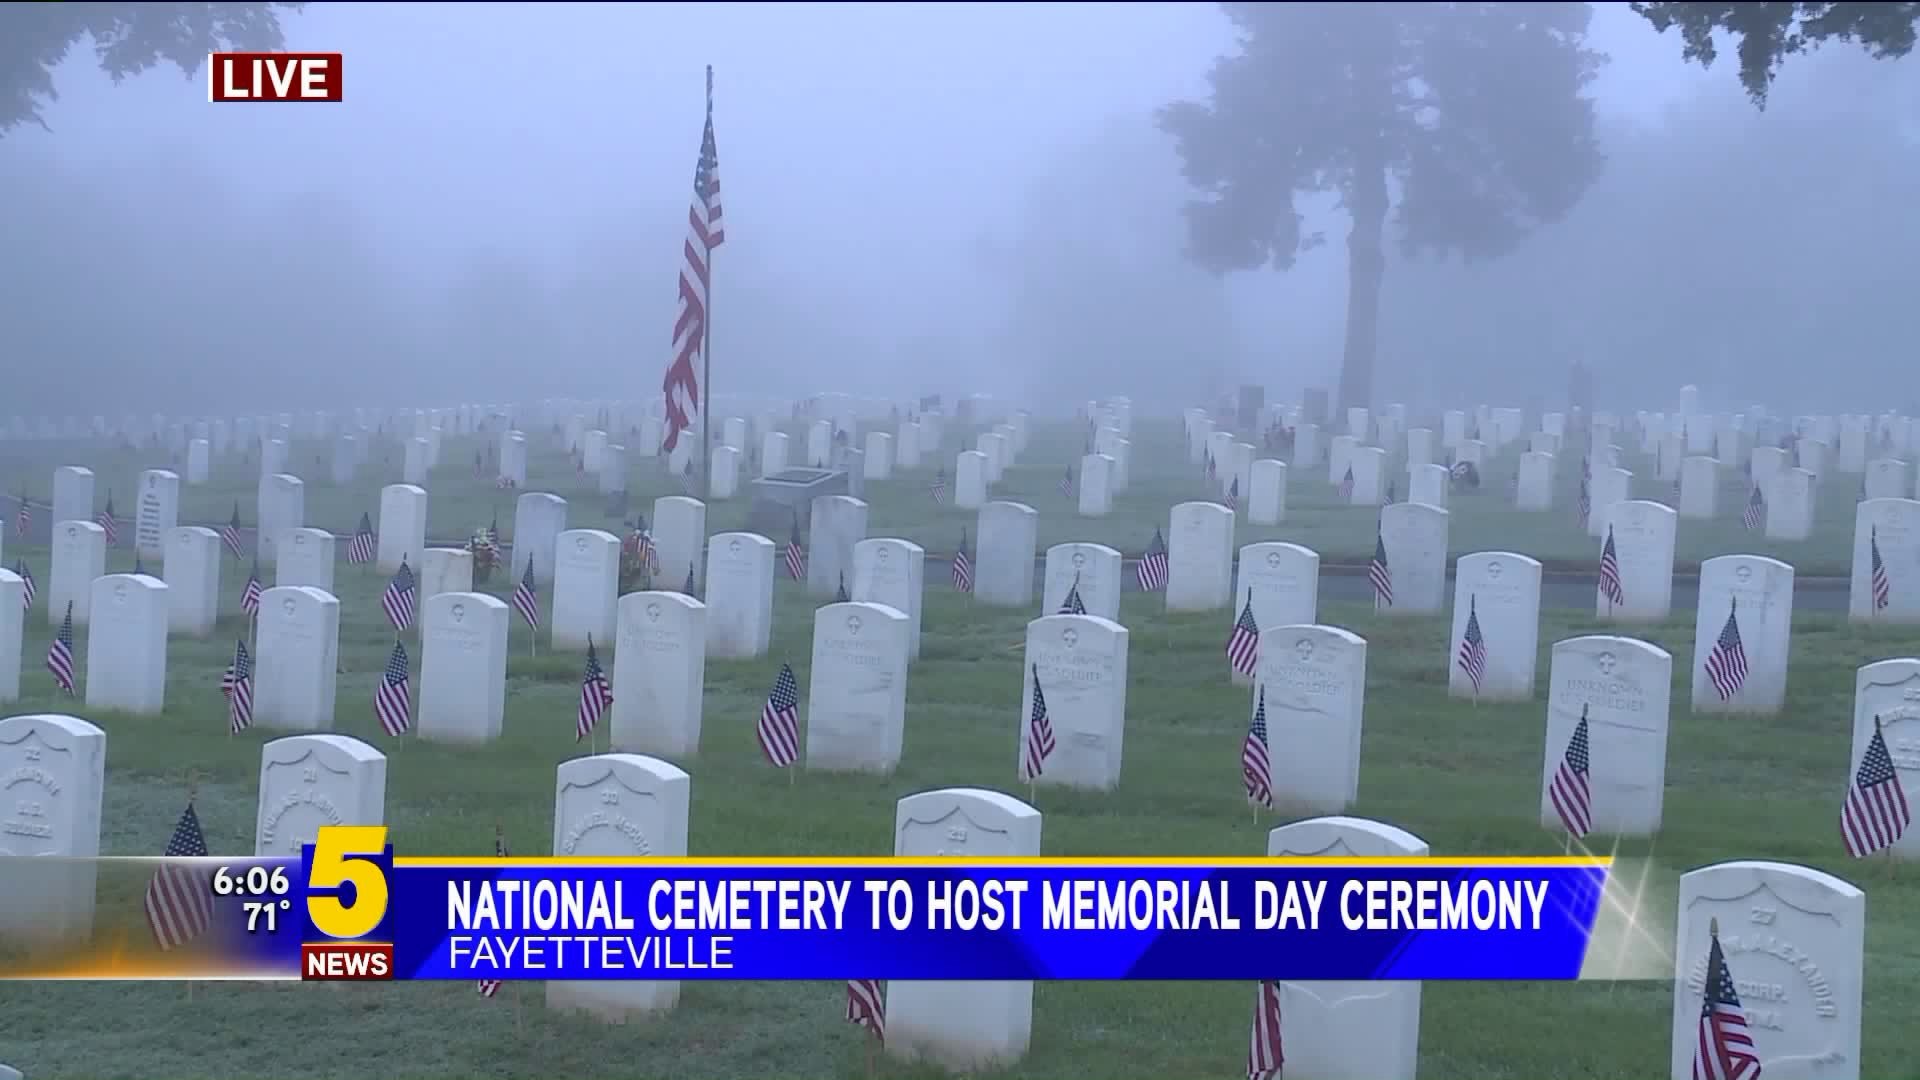 Fayetteville National Cemetery Ceremony